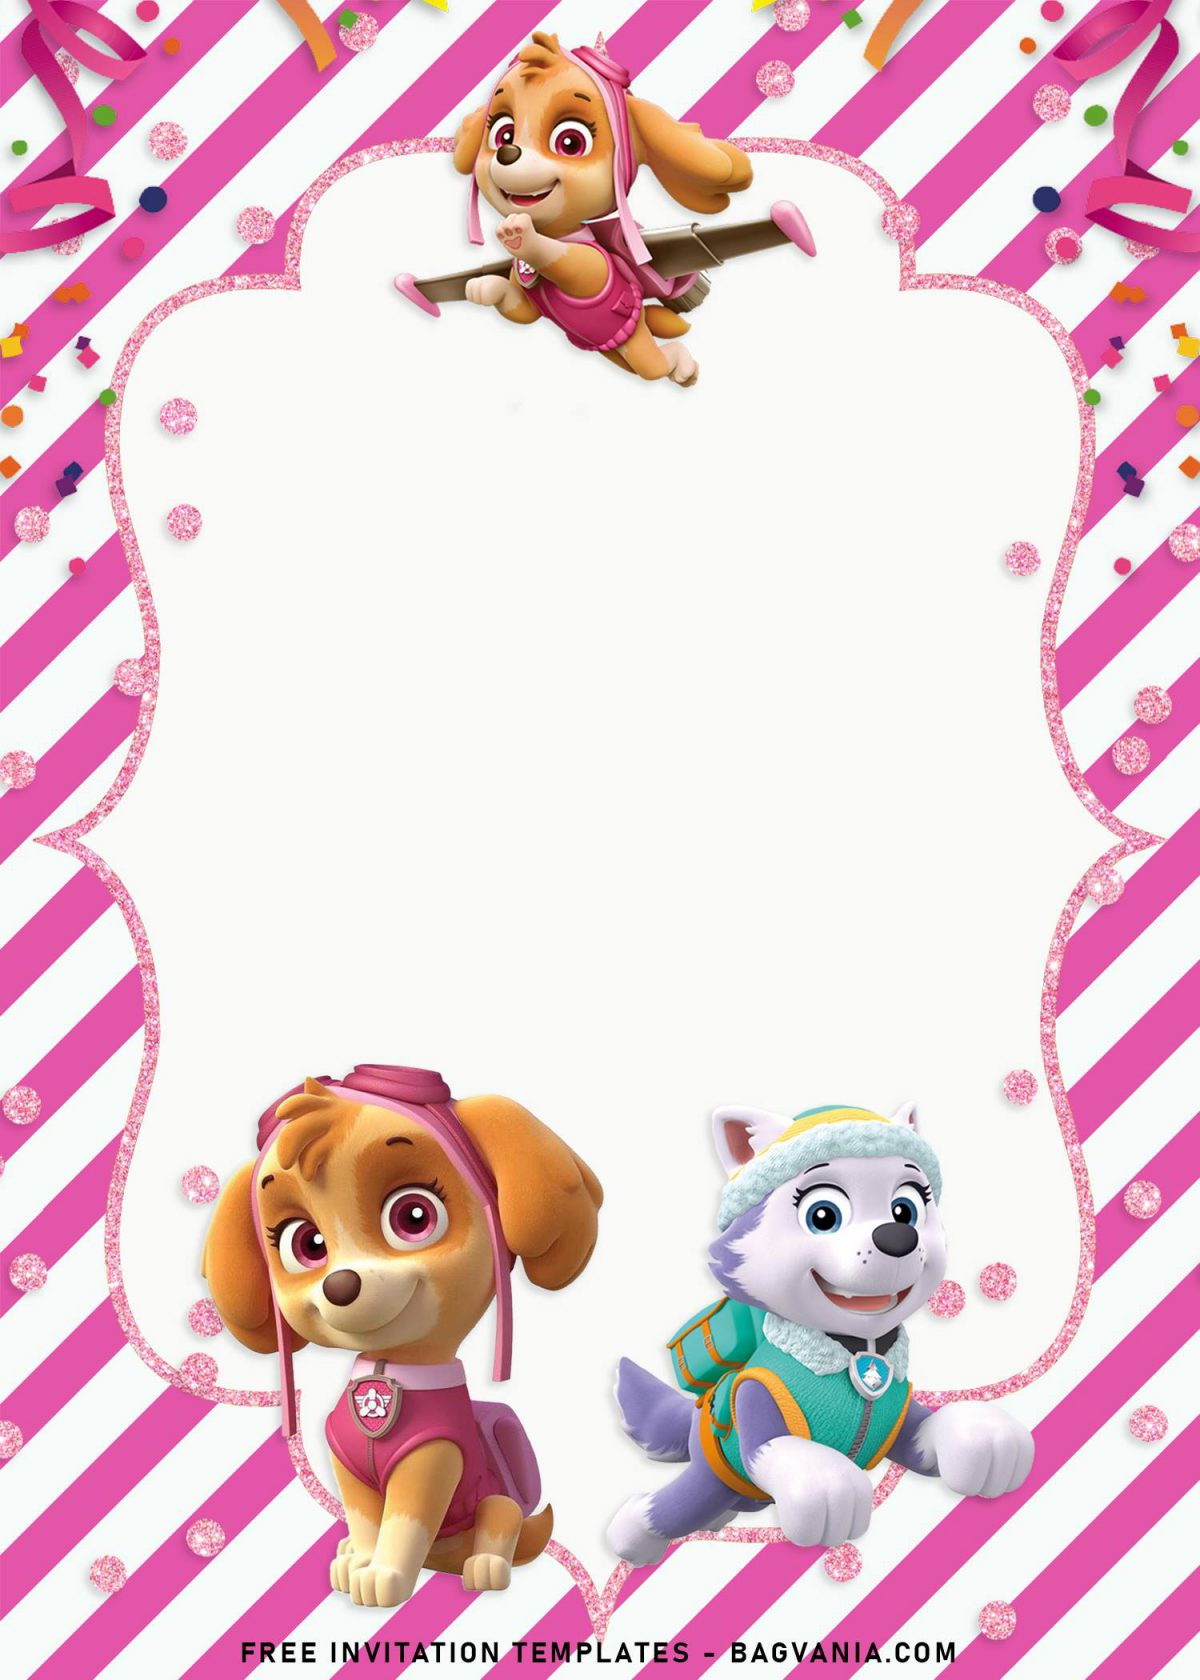 8+ Adorable Skye And Everest Paw Patrol Birthday Invitation Templates and has bracket frame with pink foil frame